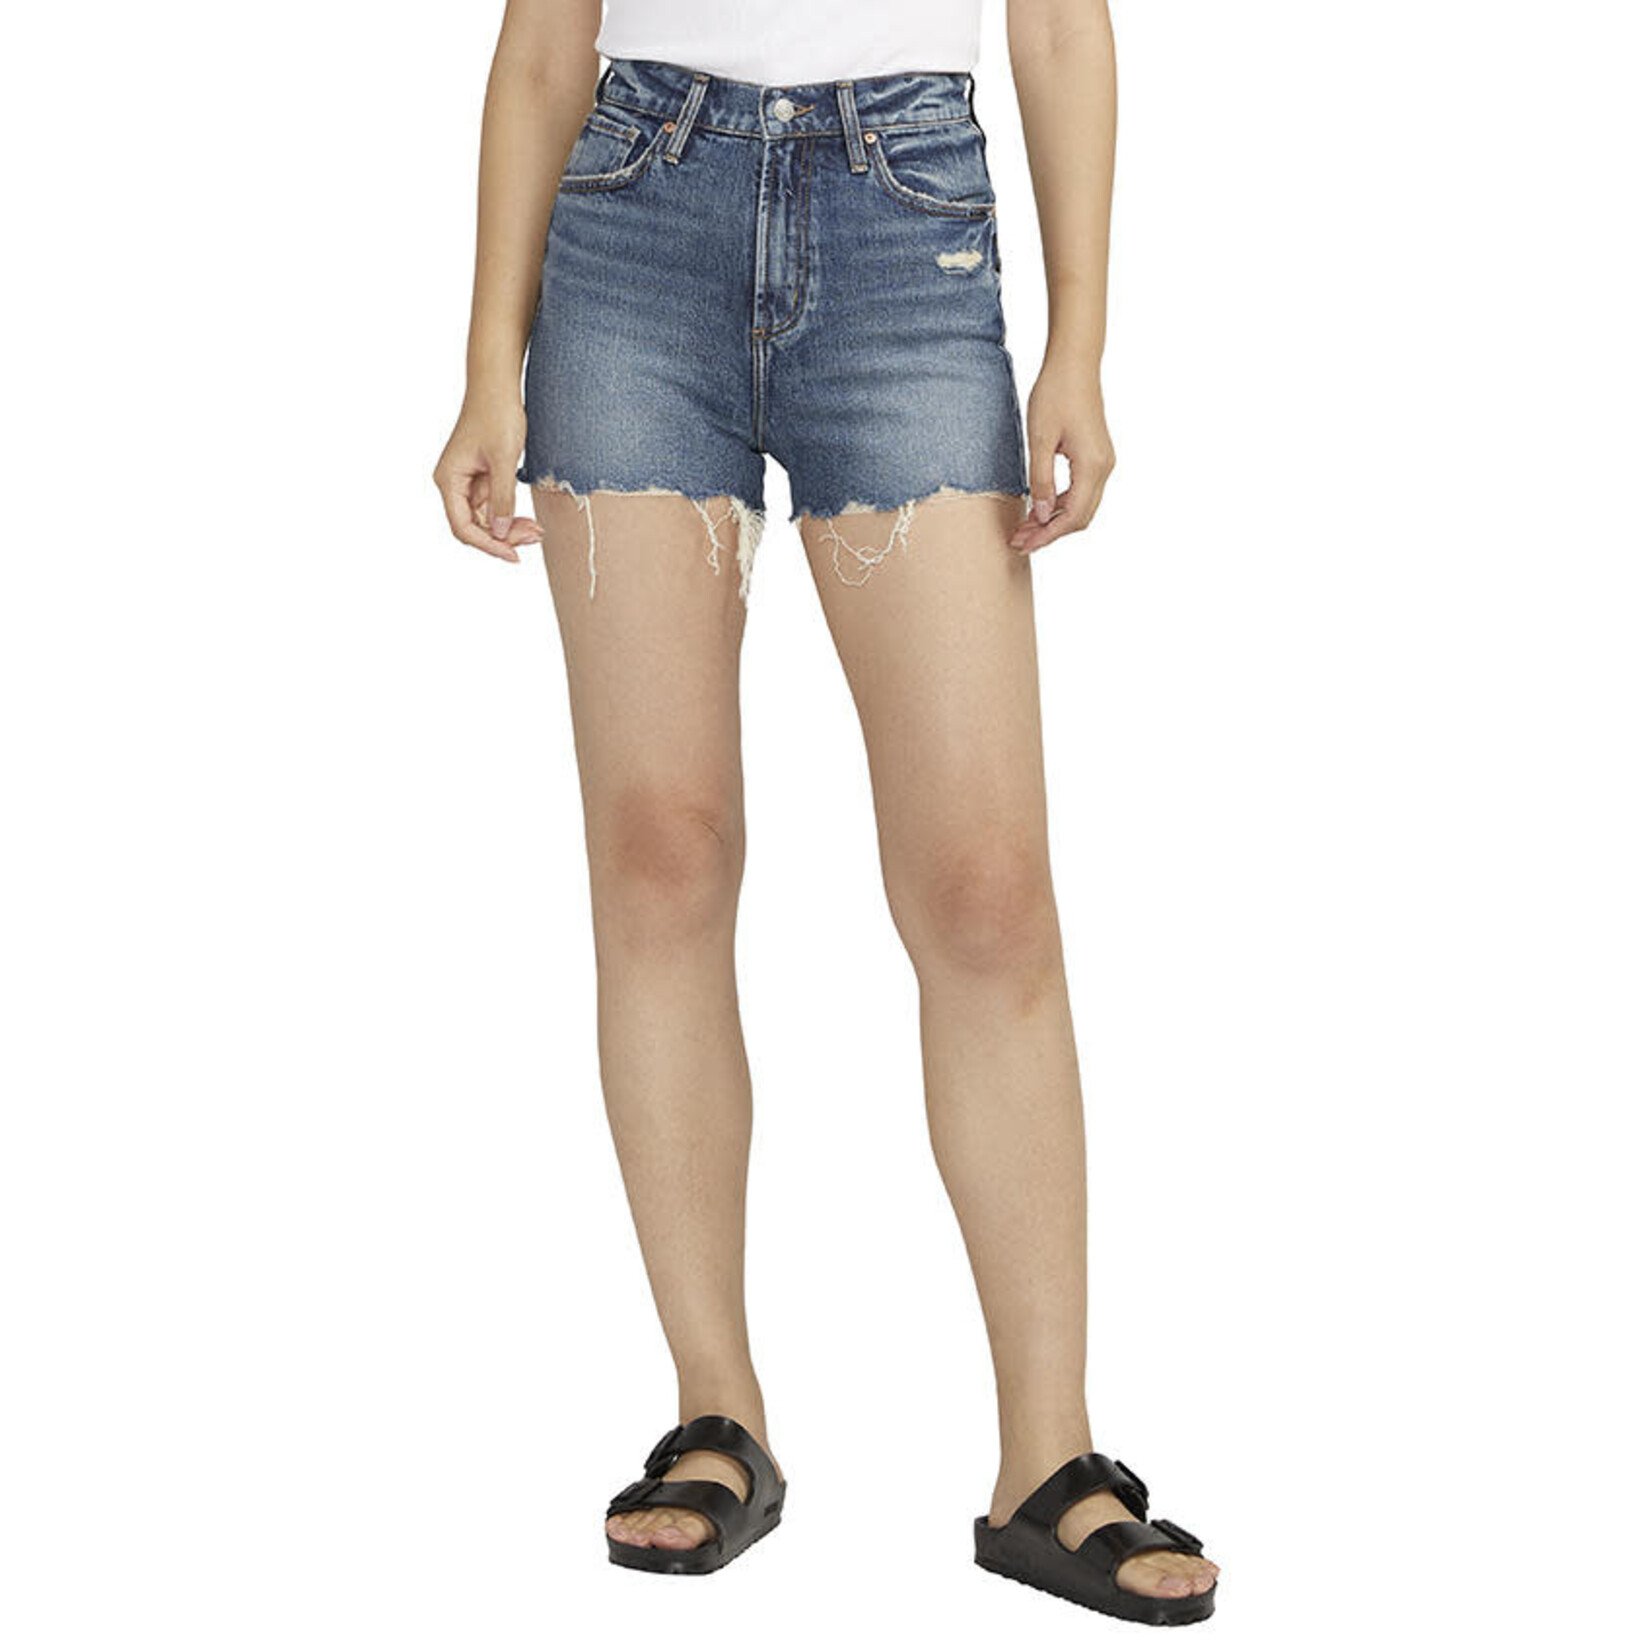 Silver Jeans Highly Desirable Shorts